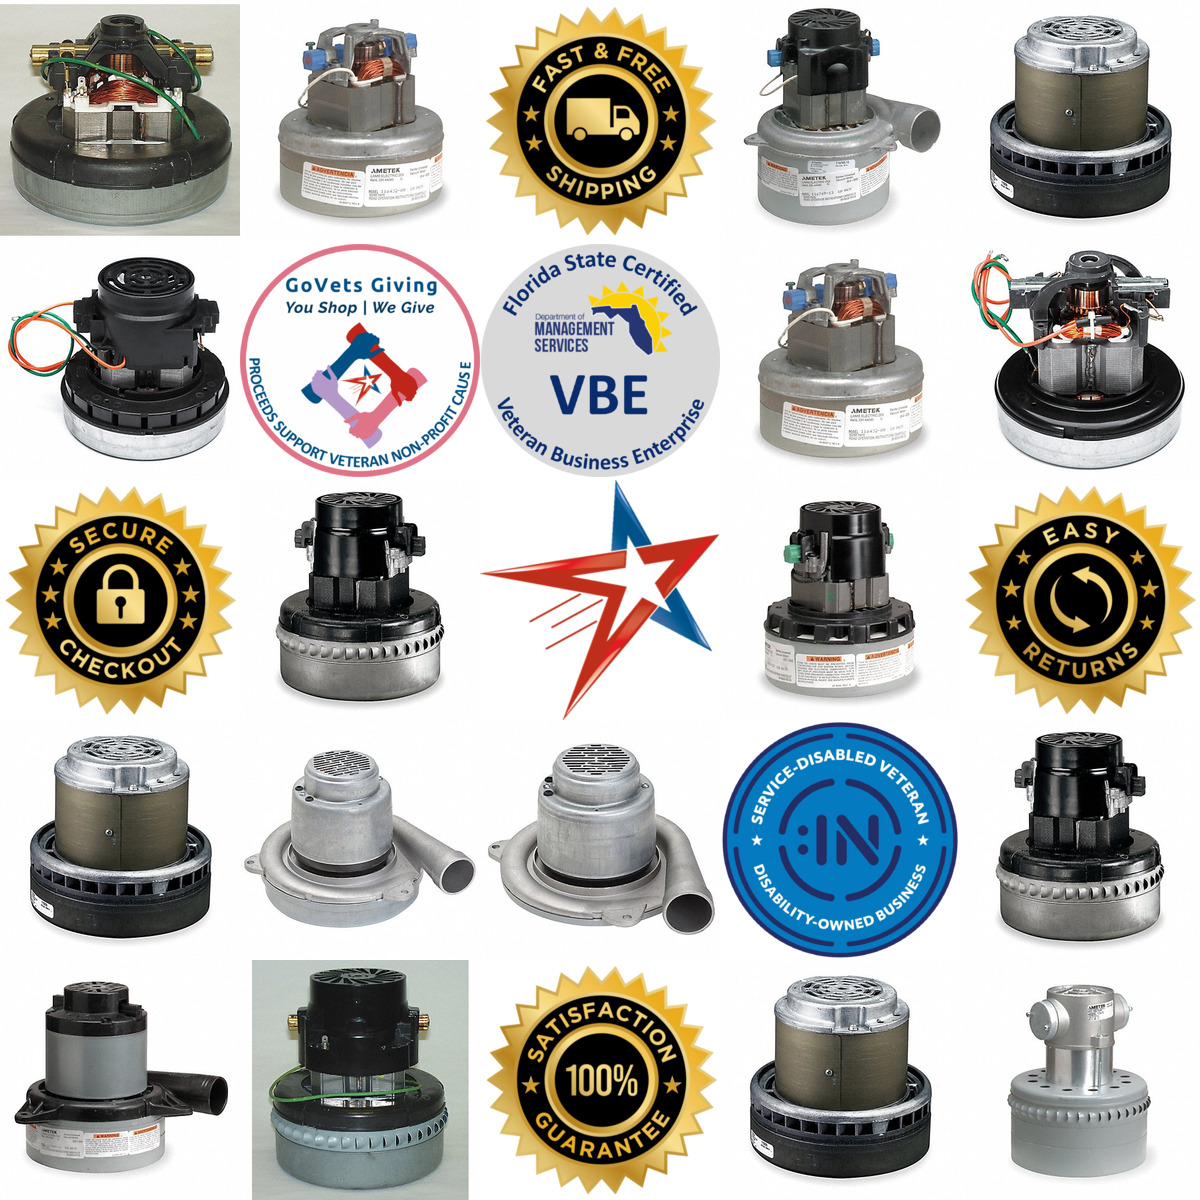 A selection of Vacuum Motors products on GoVets